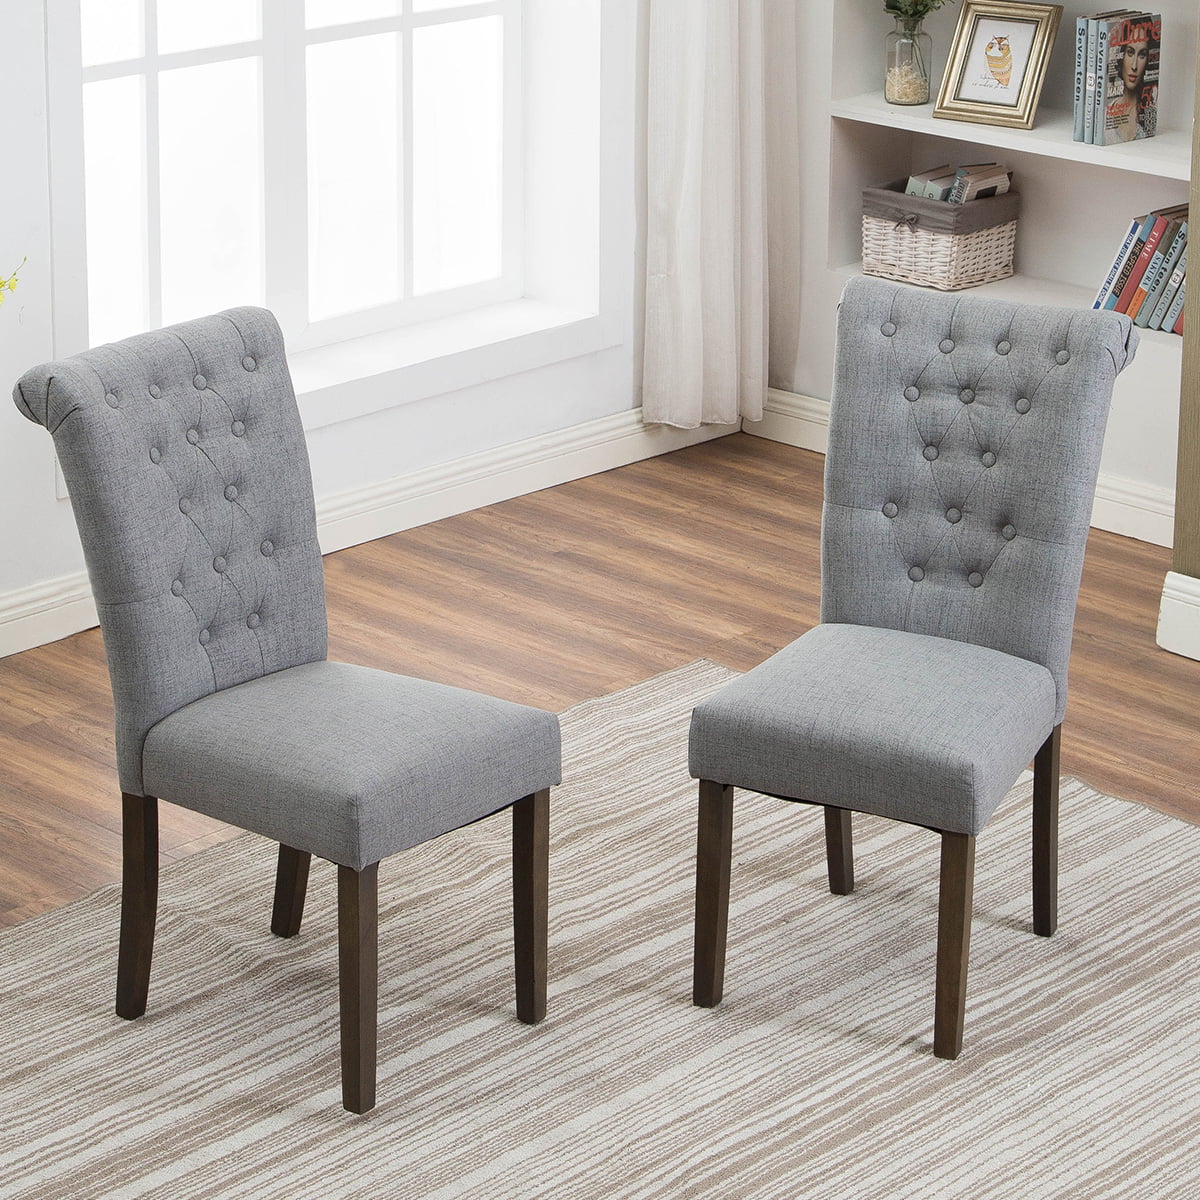 Clearance! Grey Tufted Linen Dining Chairs Set of 2, Upholstered High